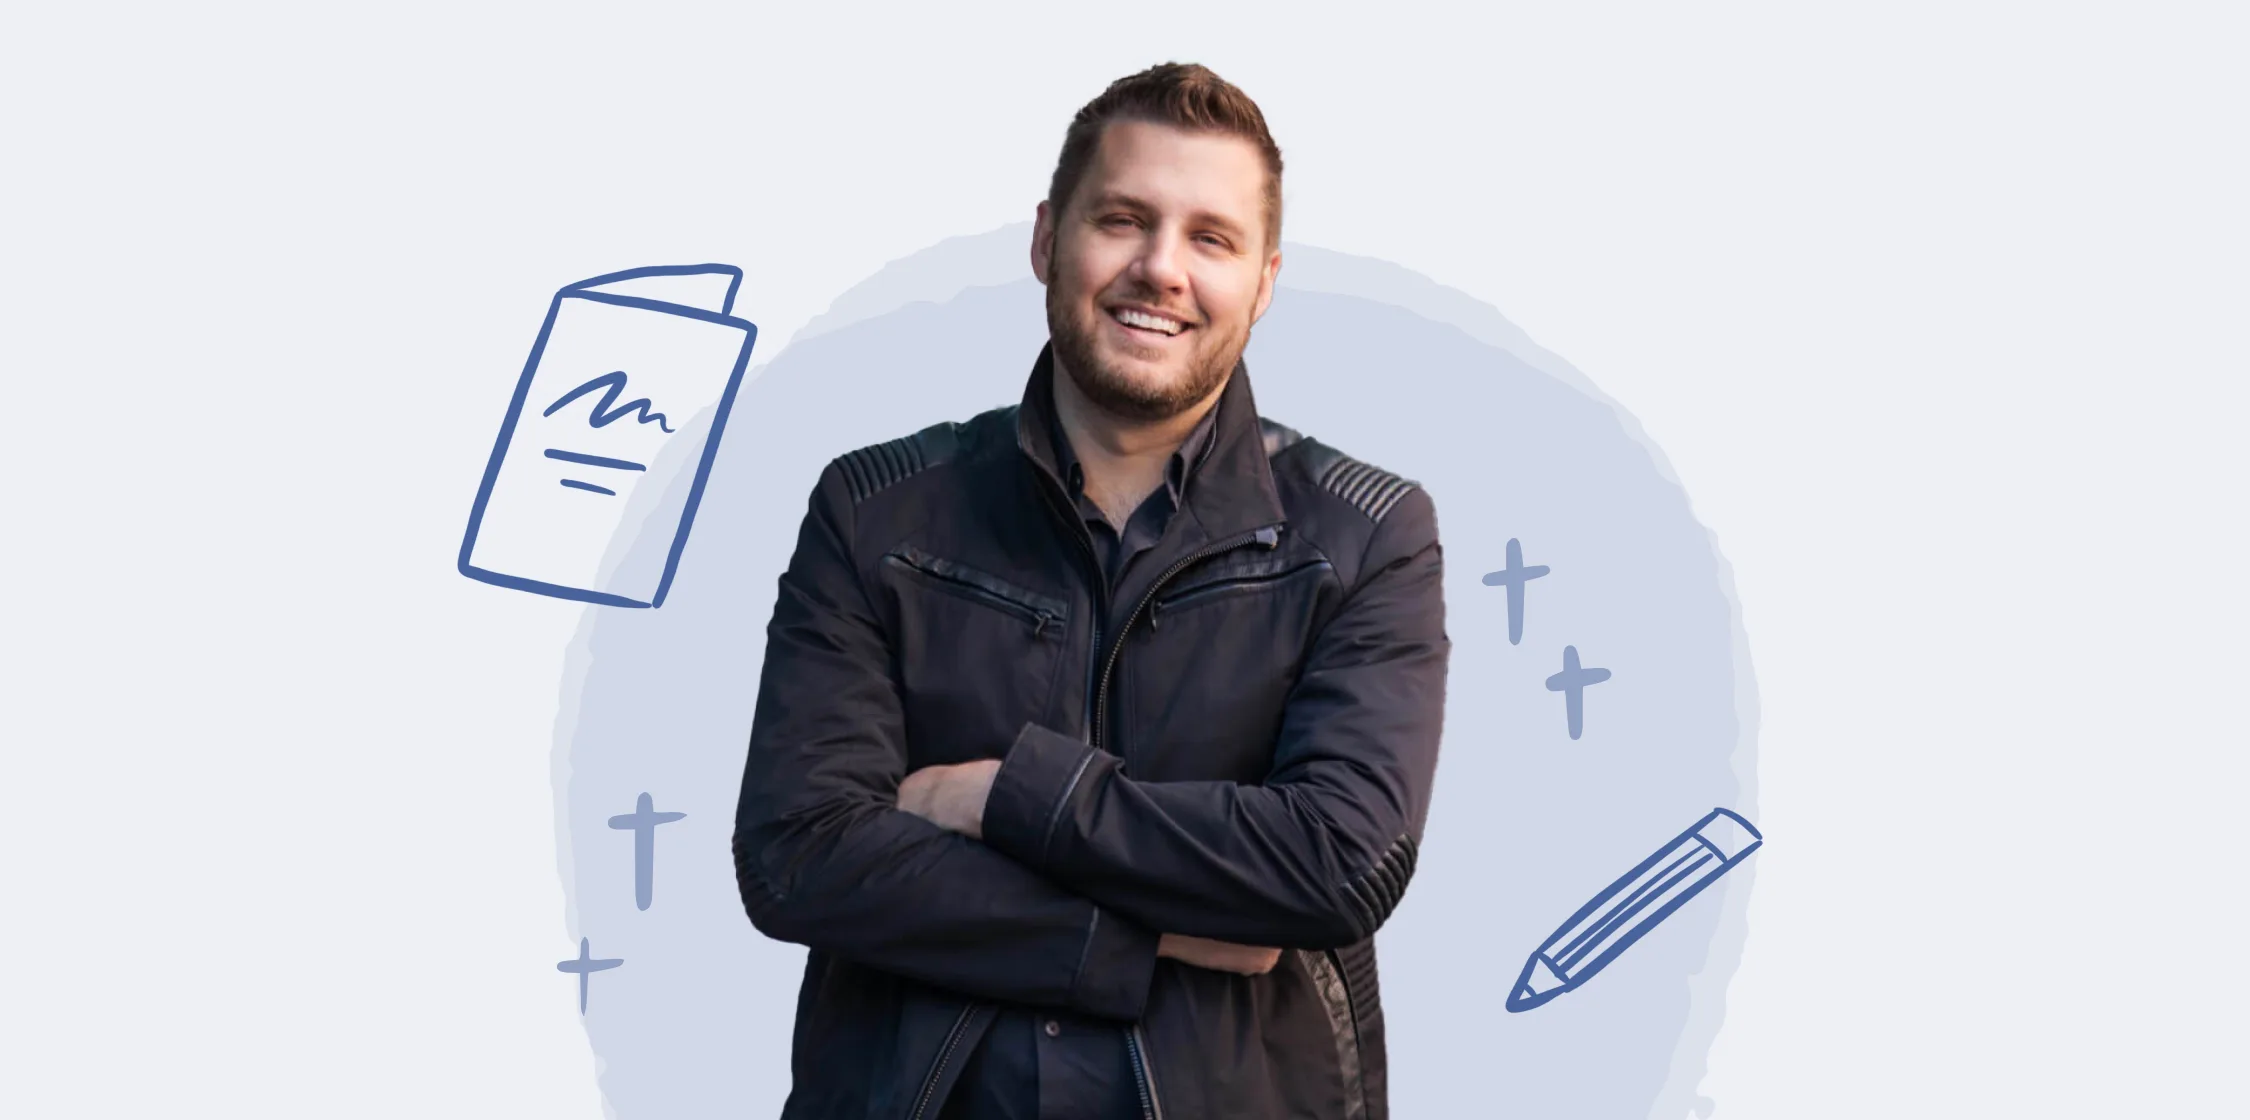 How #1 NYT Bestselling author Mark Manson uses the ConvertKit Sponsor Network to make $15k a month directly from his newsletter